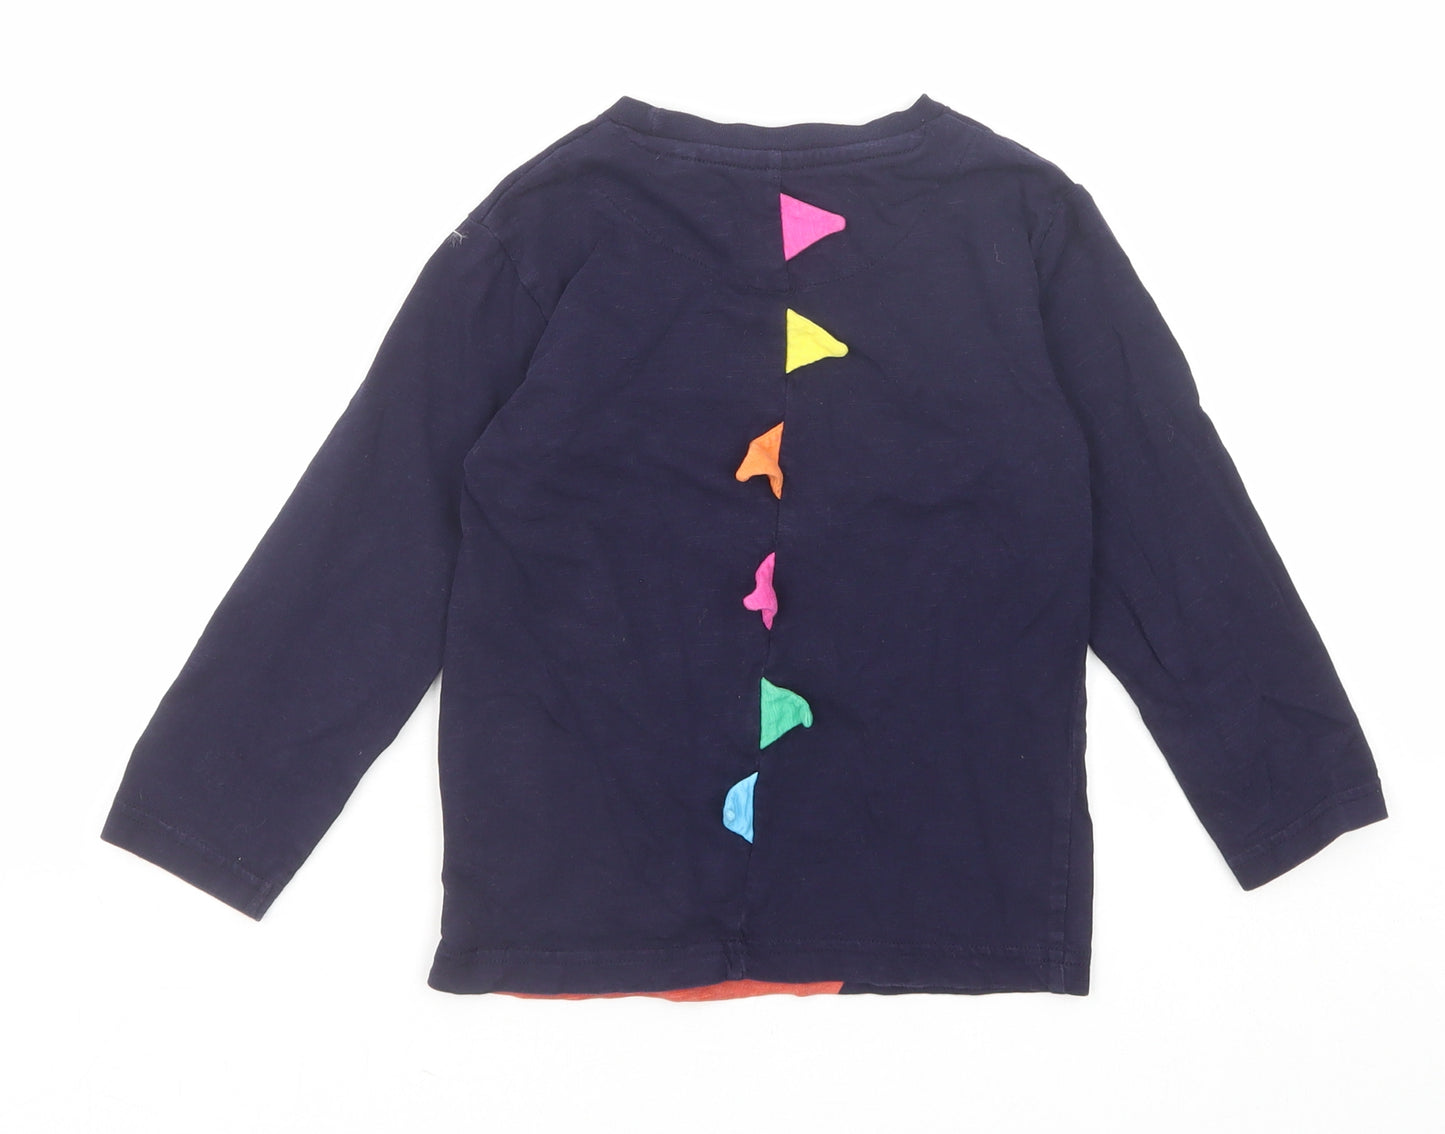 NEXT Girls Blue Cotton Pullover T-Shirt Size 3-4 Years Round Neck Pullover - Christmas Dinosaur